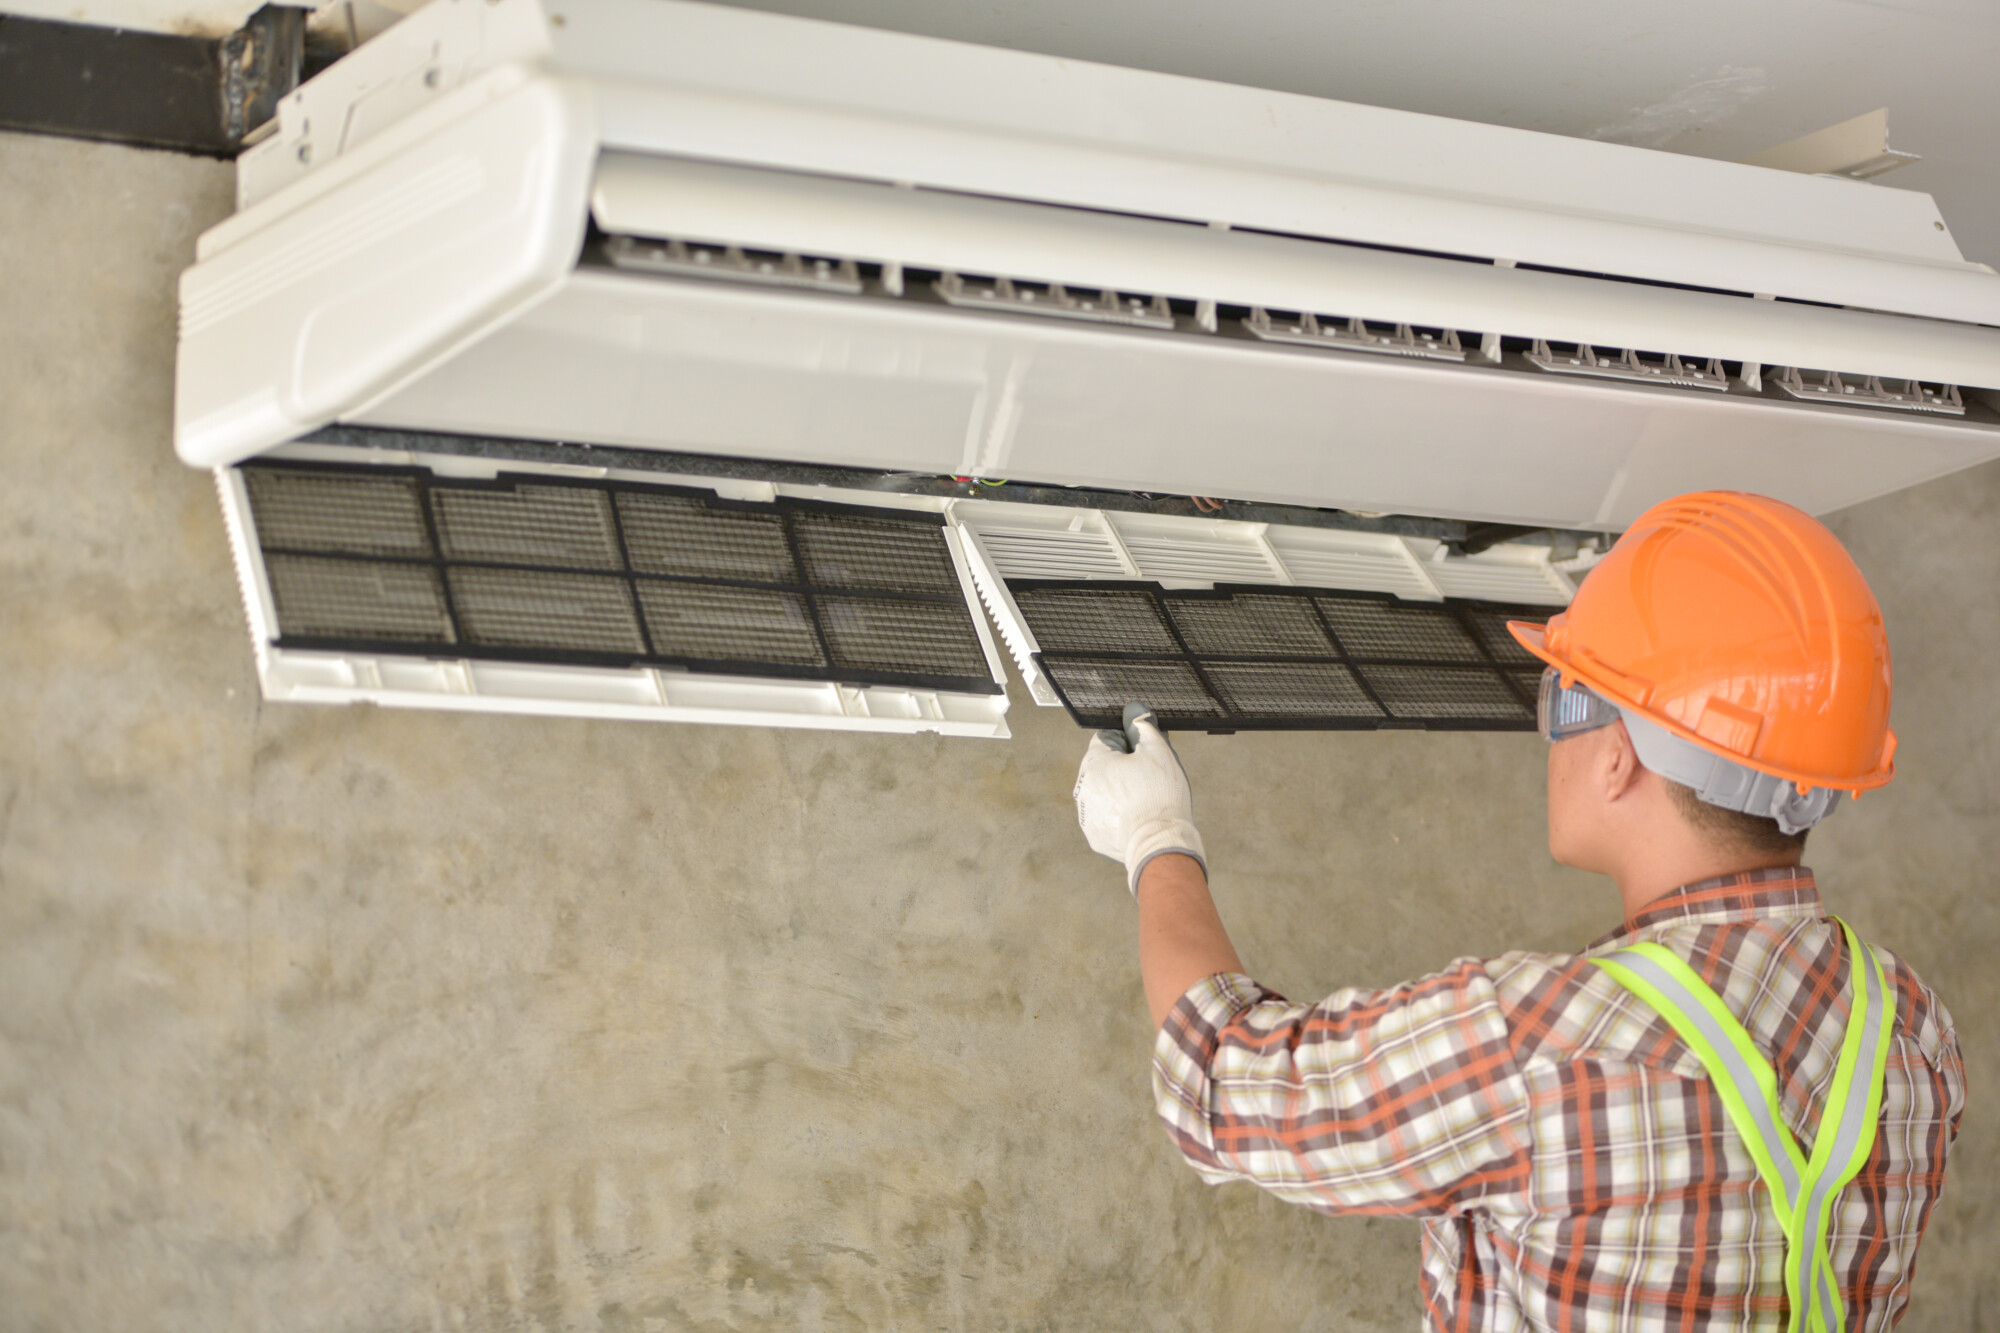 As a homeowner, it is important to know how to care for your HVAC system. Here is a quick guide to proper HVAC maintenance.